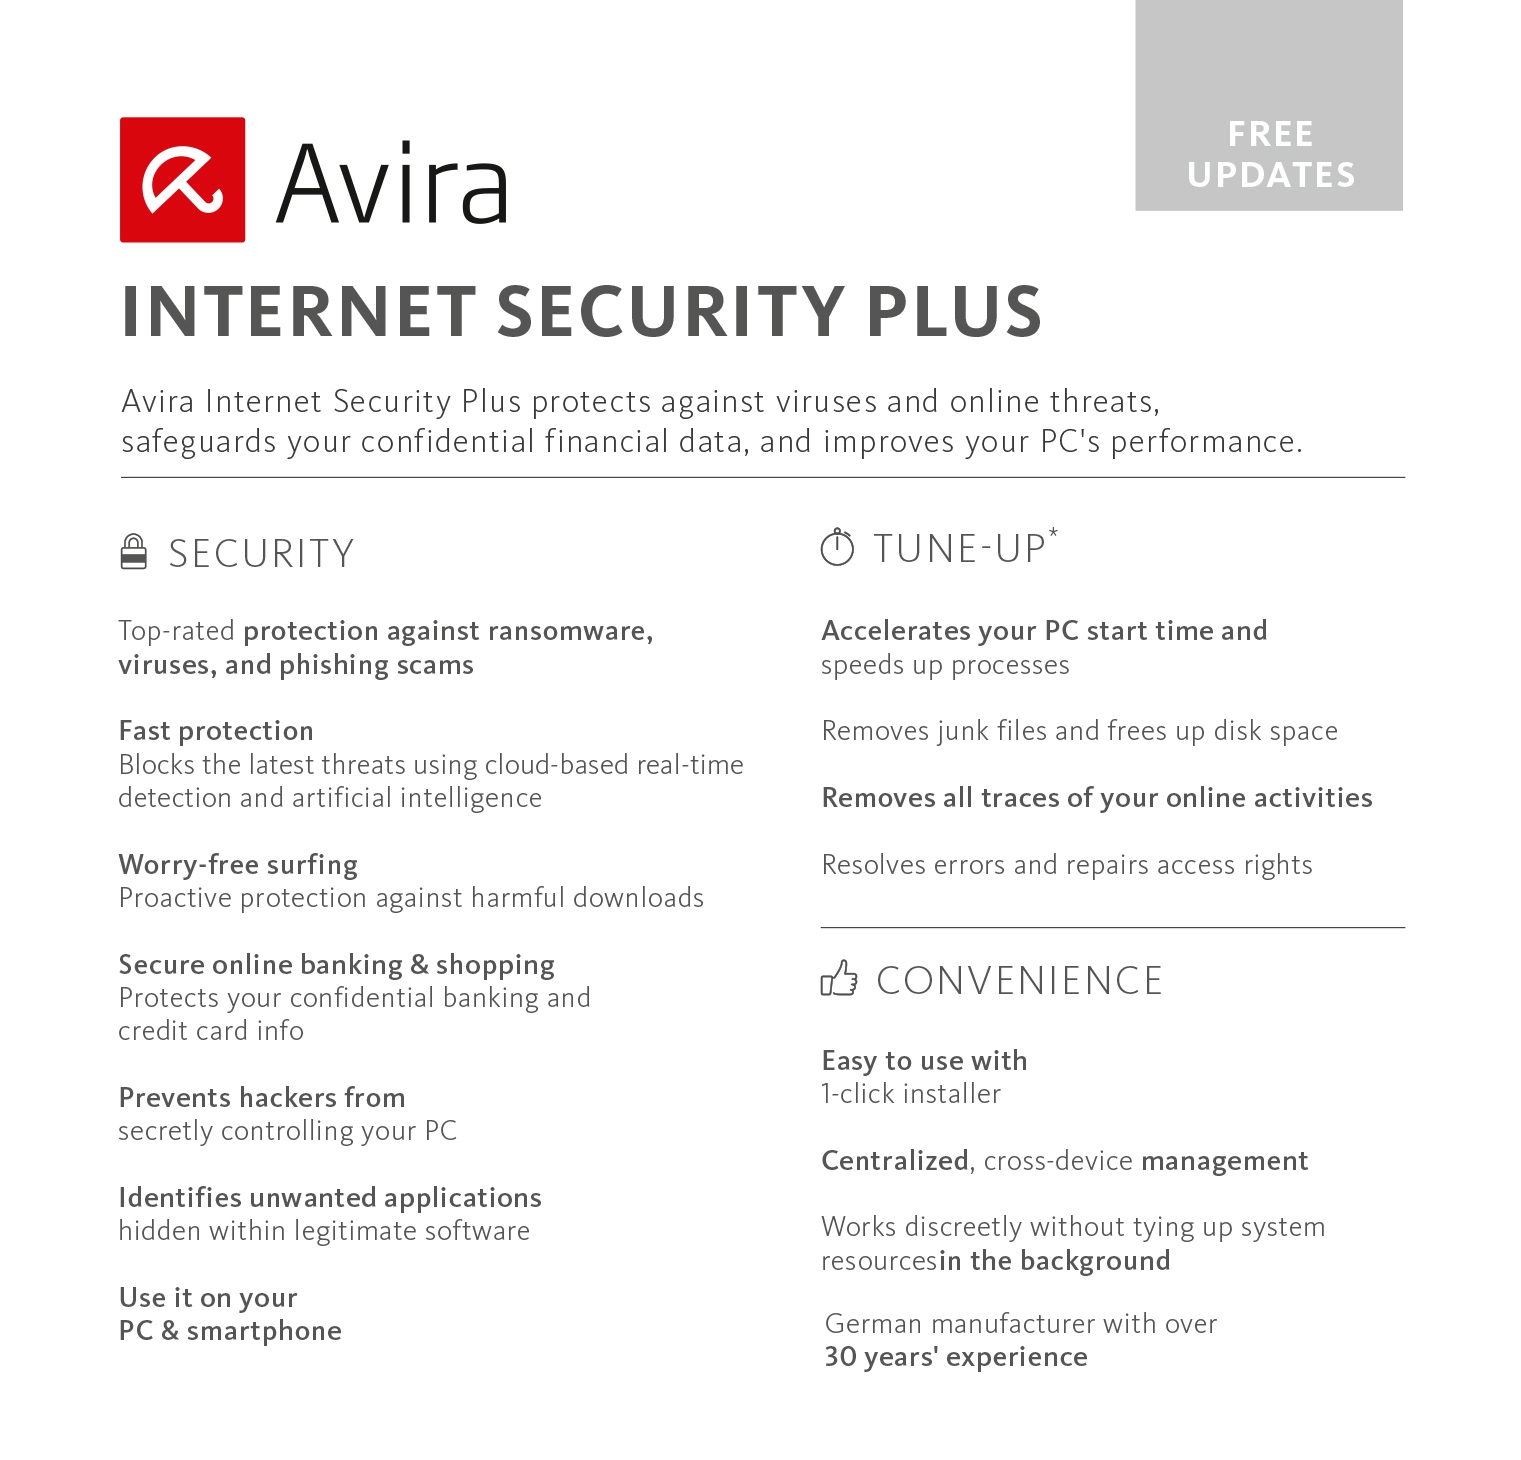 Avira Internet Security Plus 2018 | 2 Device | 2 Year | Download [Online Code]